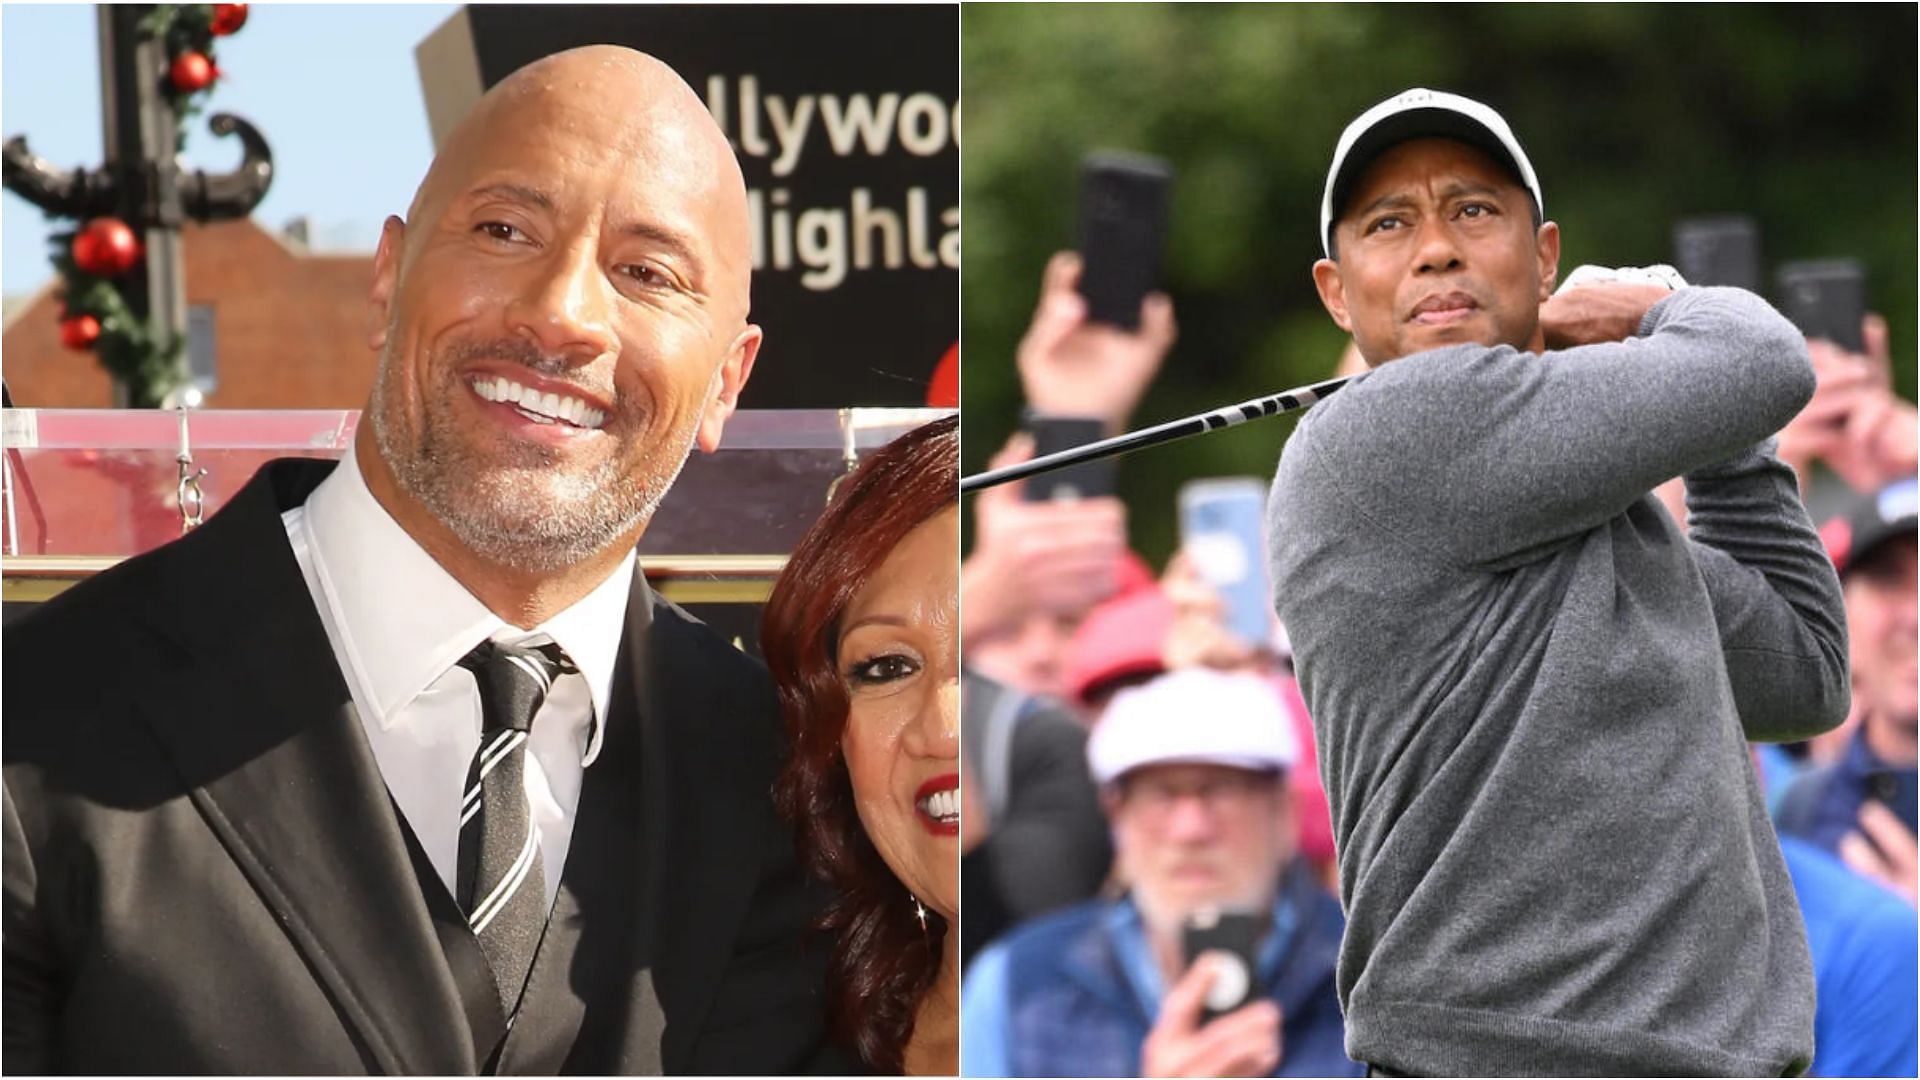 The Rock and Woods are world-famous megastars